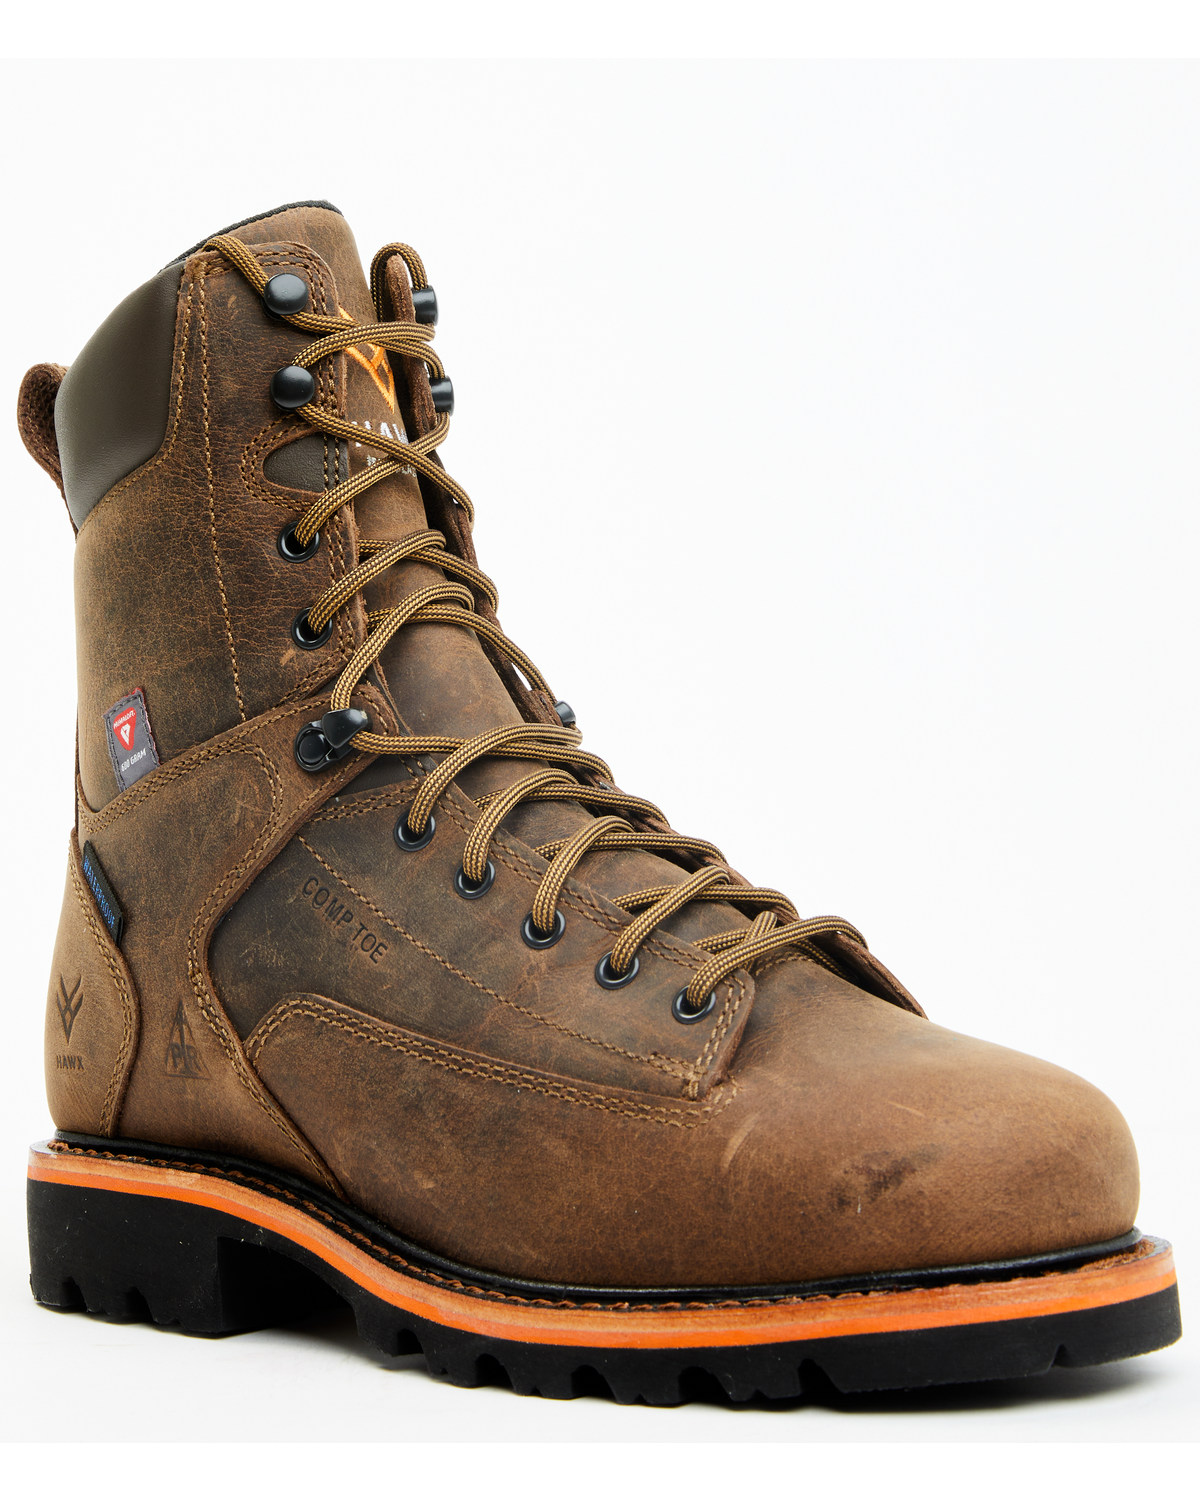 Hawx Men's 8" Insulated Lace-Up Waterproof Work Boots - Composite Toe